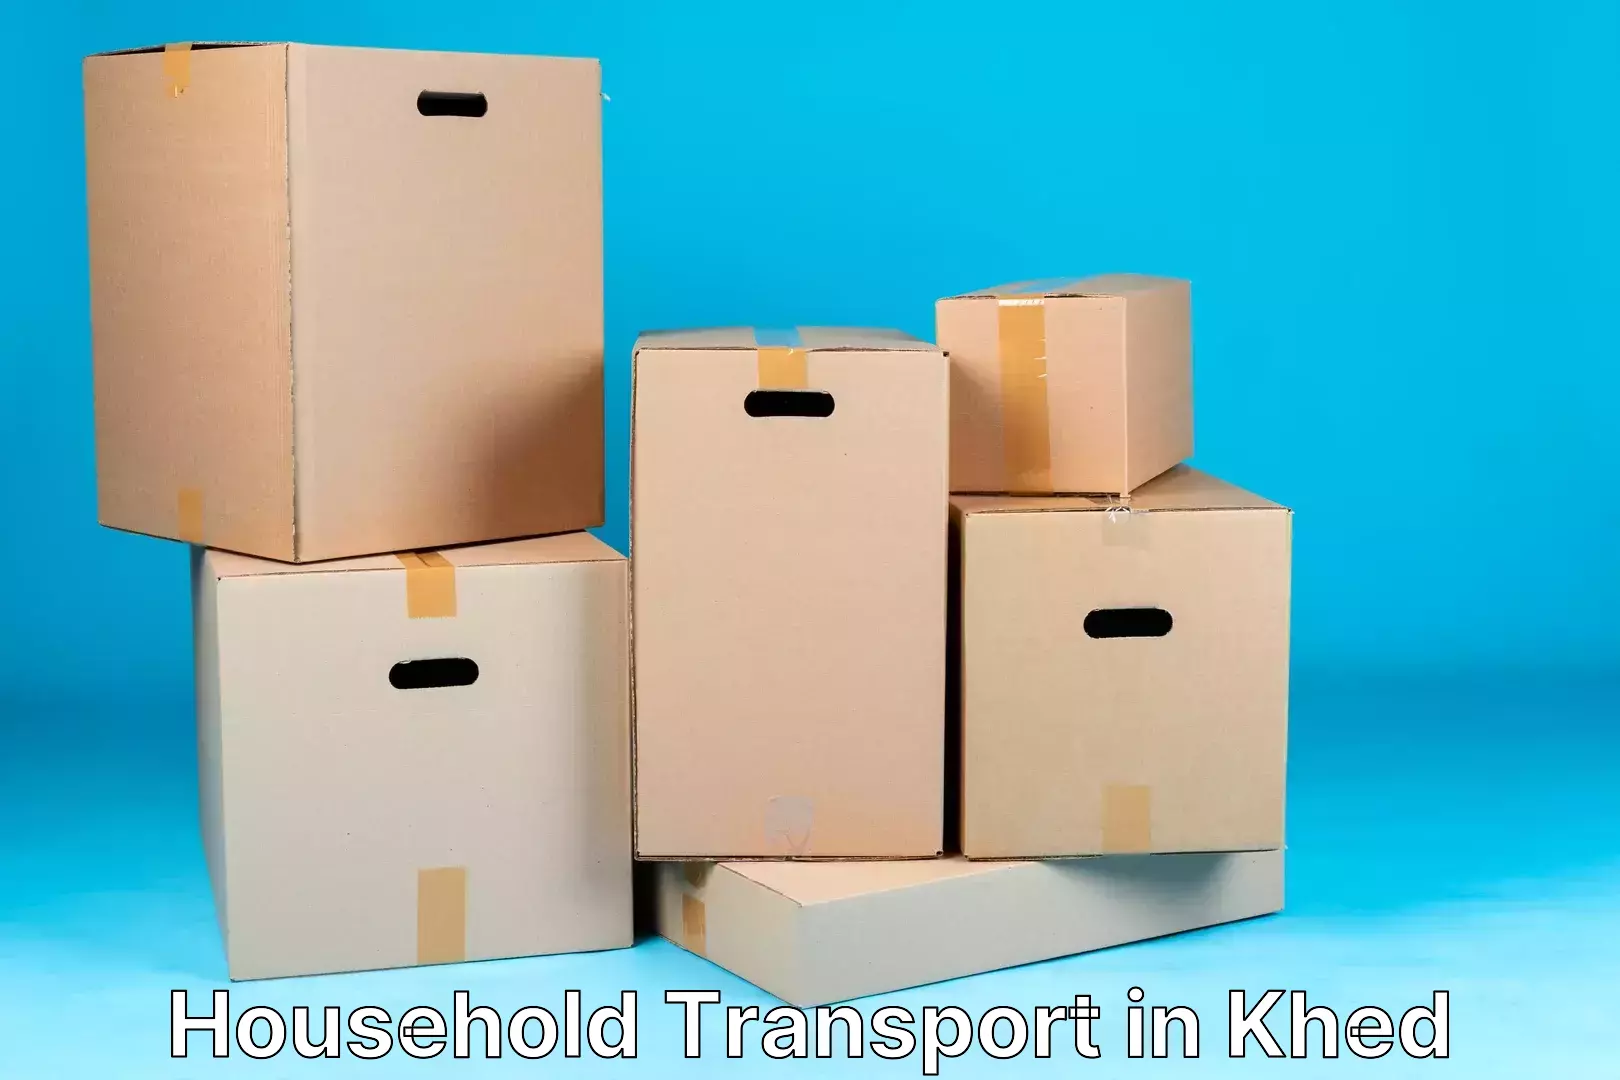 Affordable relocation services in Khed